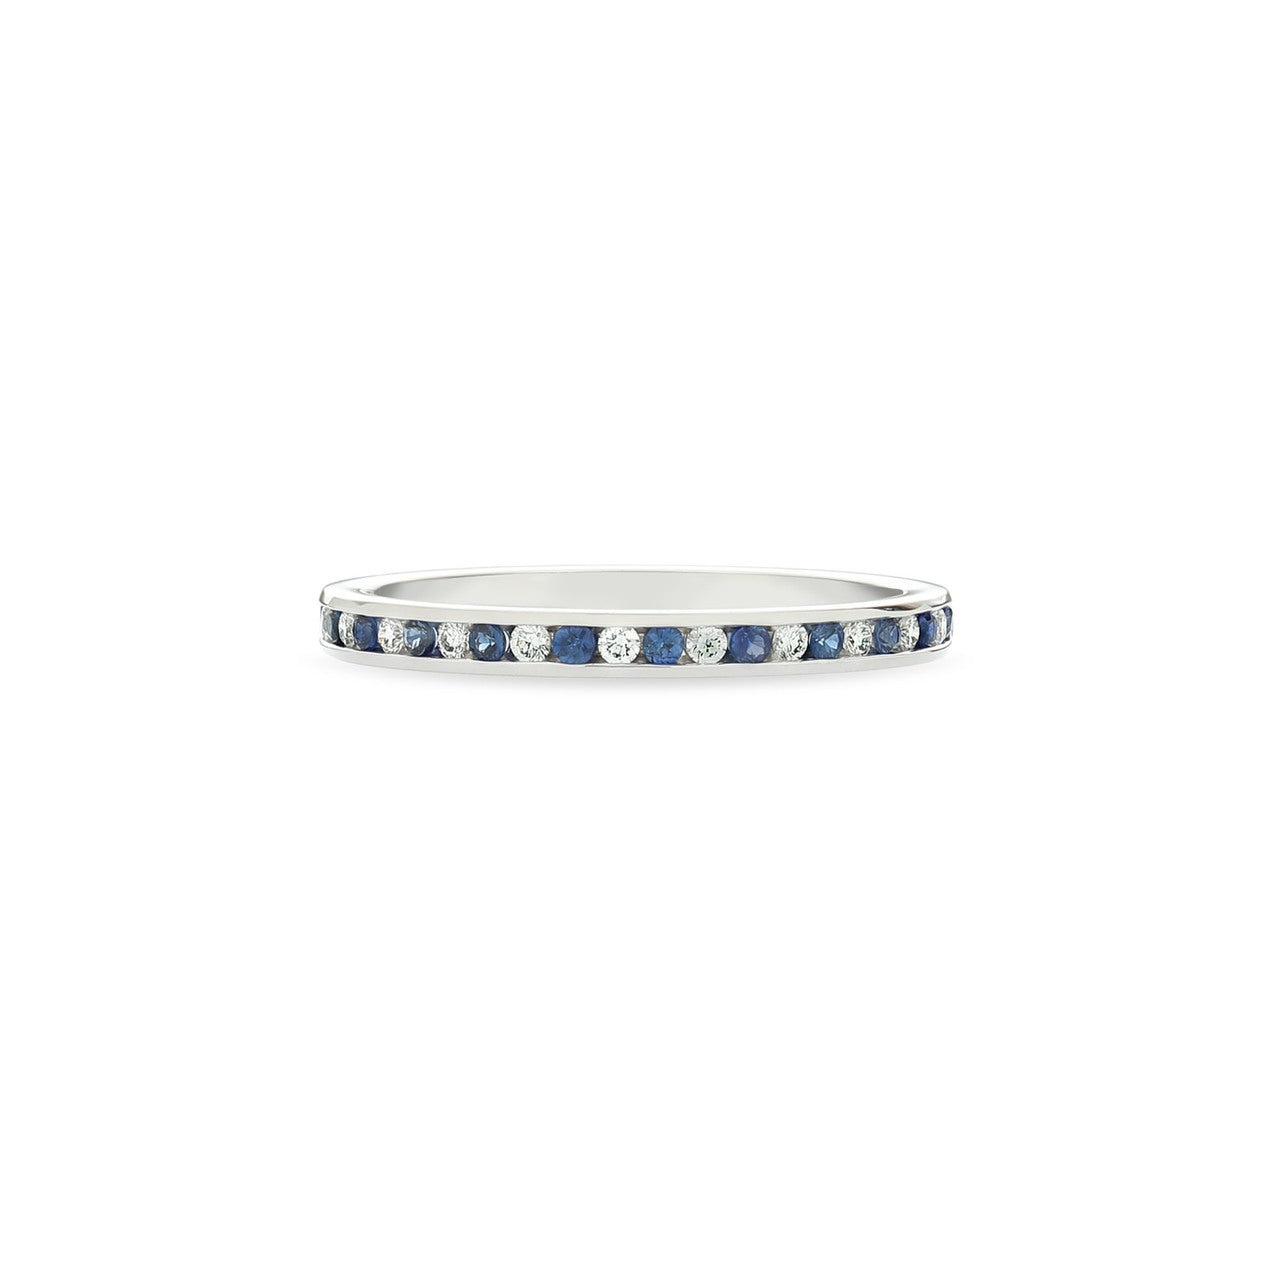 Fink's 18K White Gold Channel Set Sapphire and Diamond Wedding Band